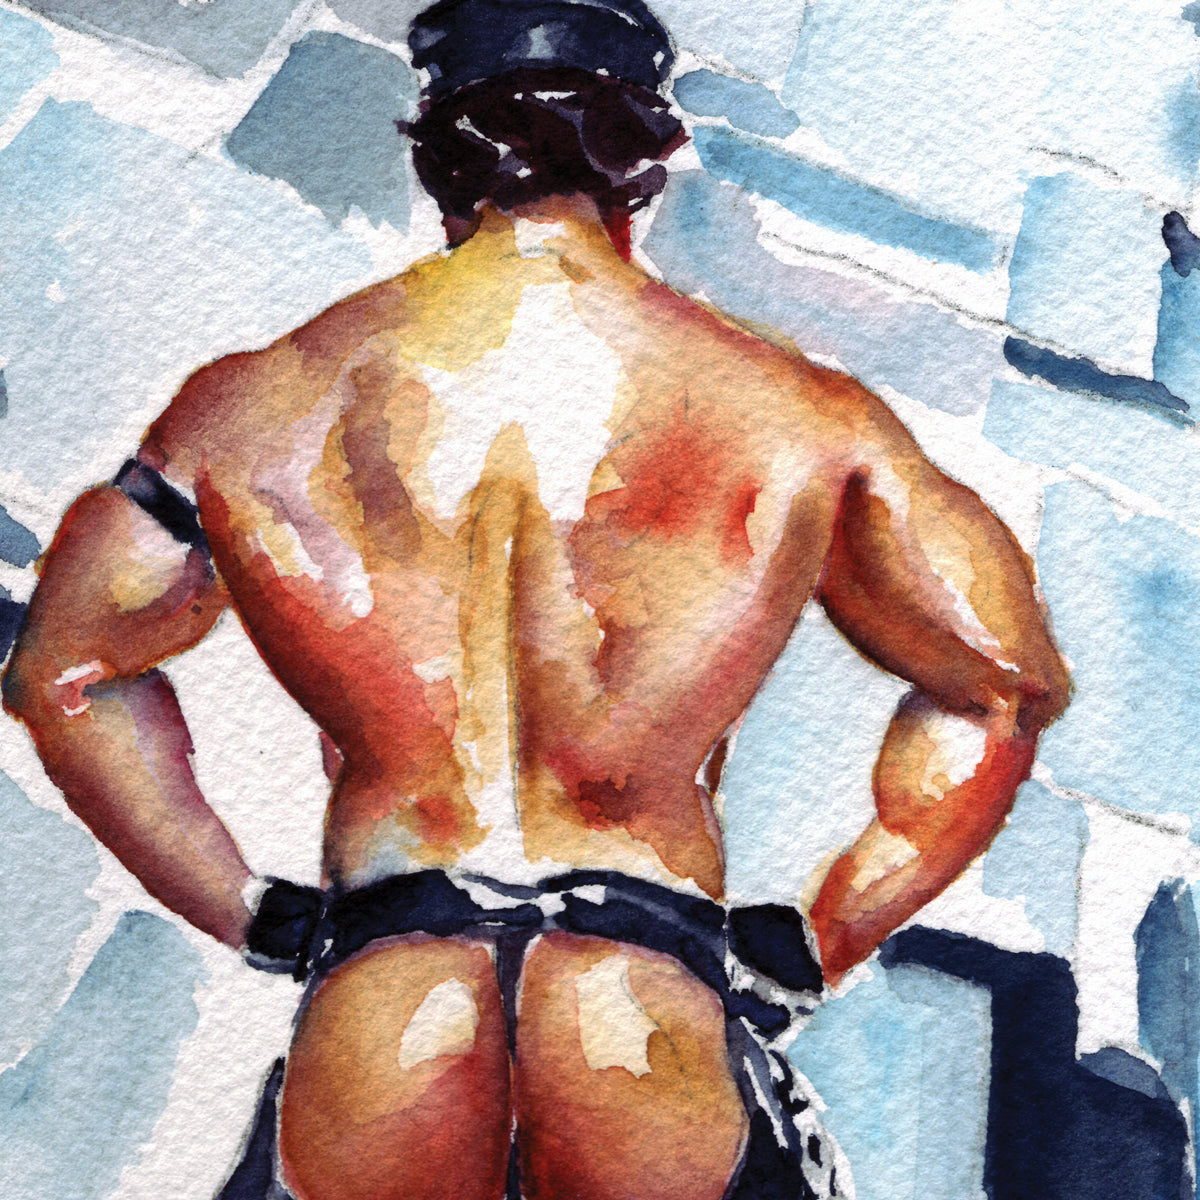 Leathered Beast: Muscular Man in Chaps and Cap's Dominant Display - Giclee Art Print